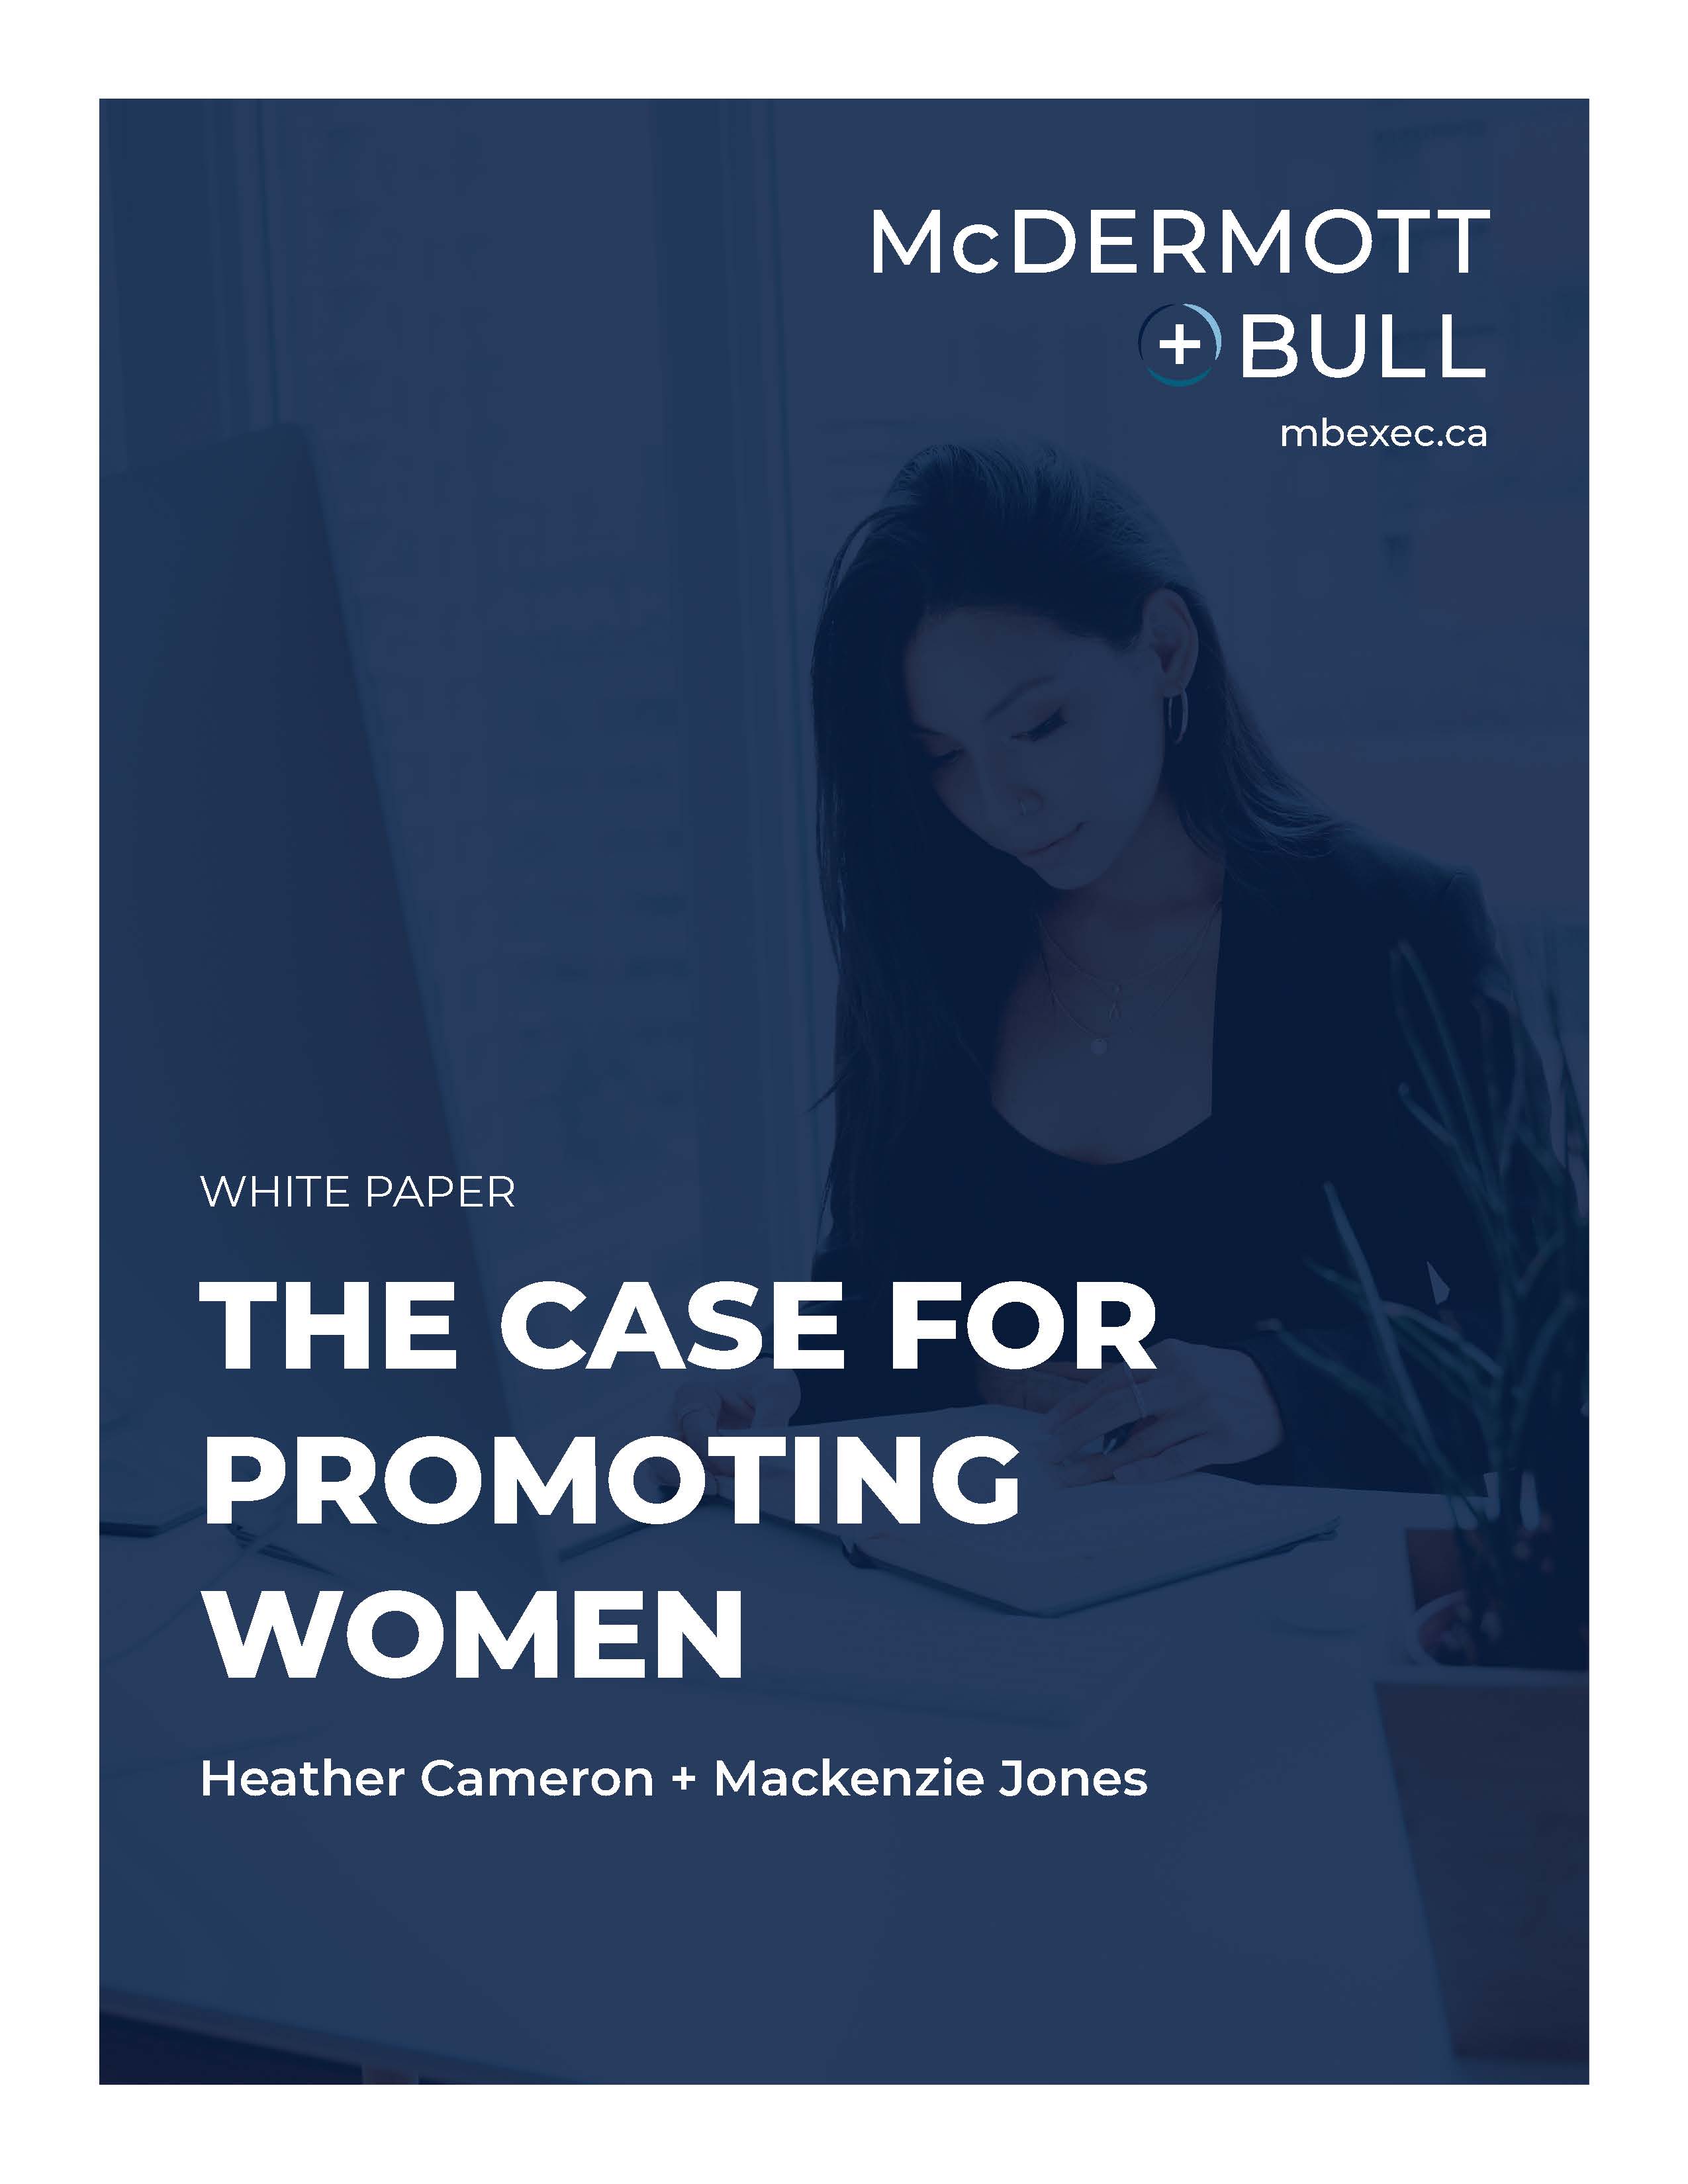 White Paper: The Case for Promoting Women by Heather Cameron and Mackenzie Jones